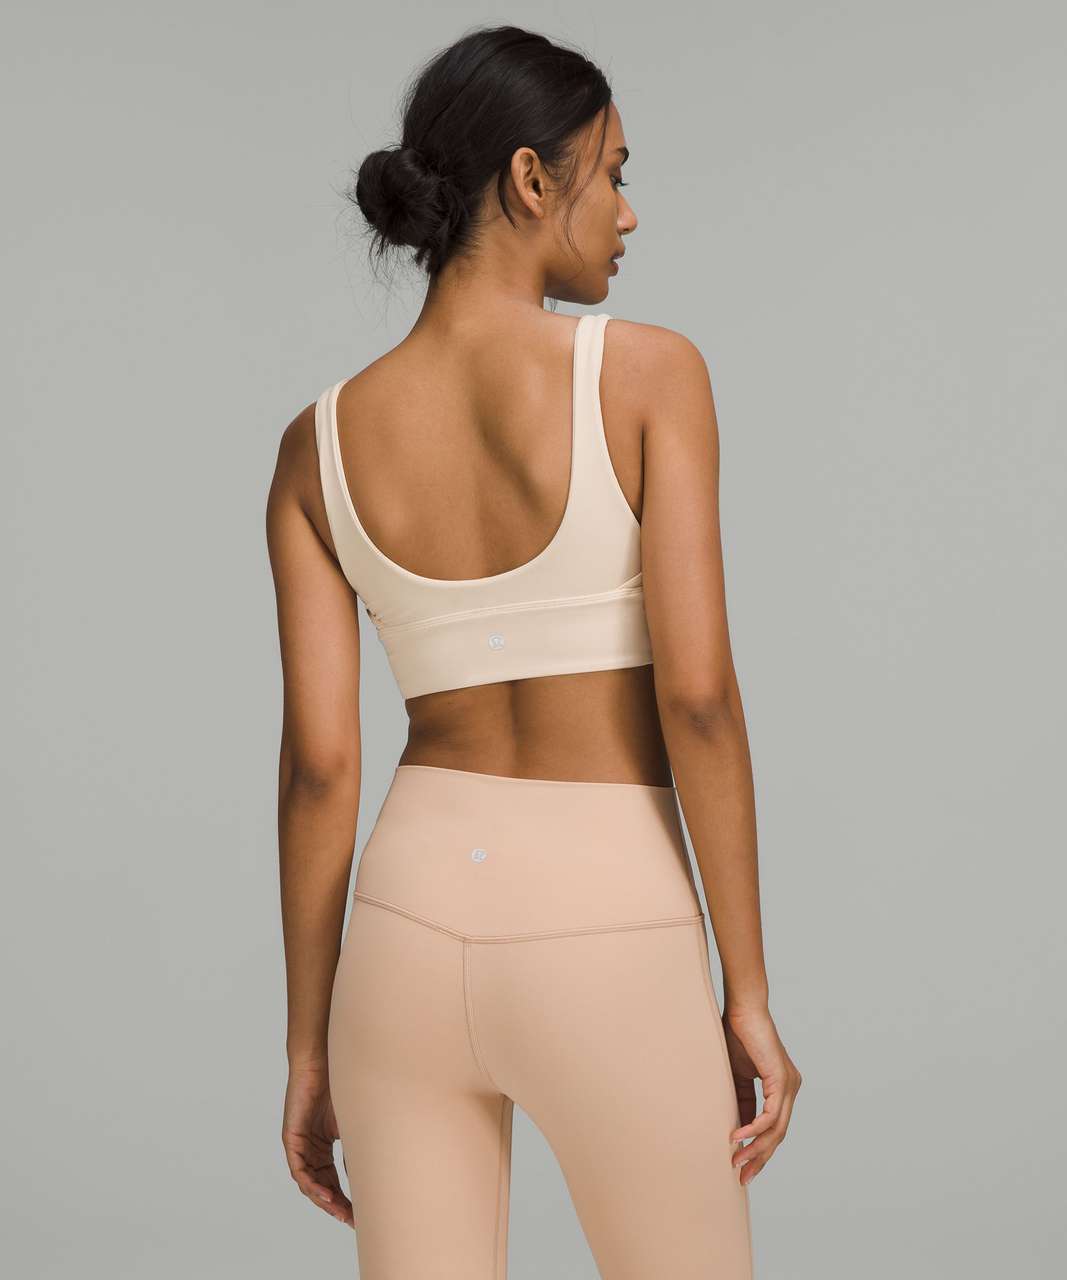 Lululemon Align™ Reversible Bra Light Support, A/b Cup In Pastel Blue/heathered  Pastel Blue